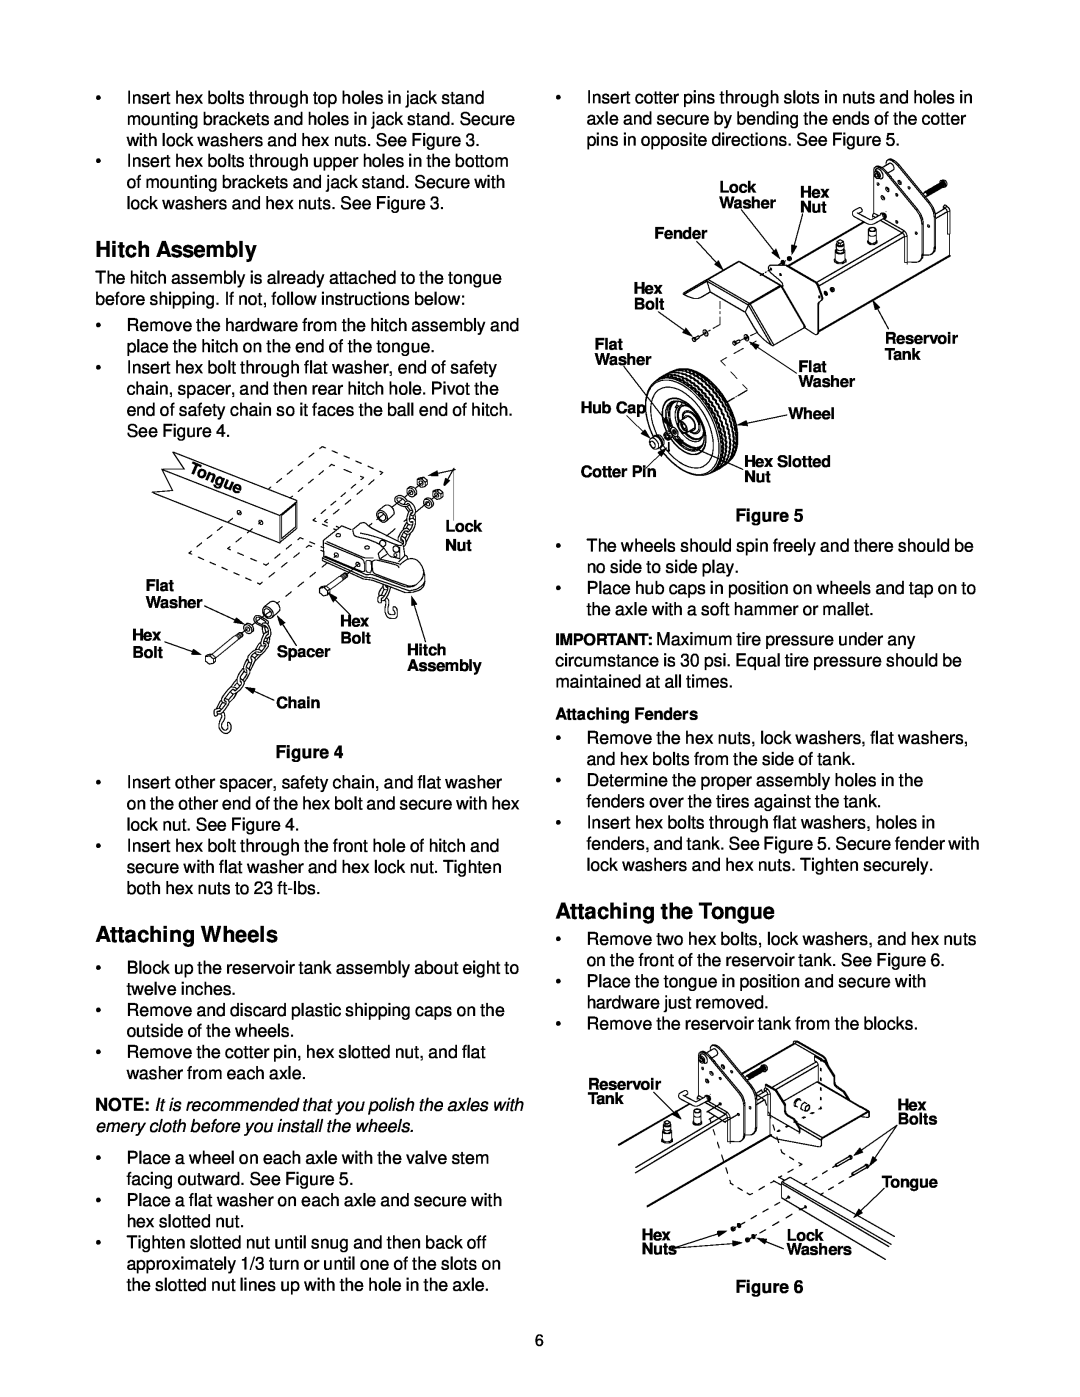 Troy-Bilt LS338 manual Hitch Assembly, Attaching Wheels, Attaching the Tongue, Attaching Fenders 